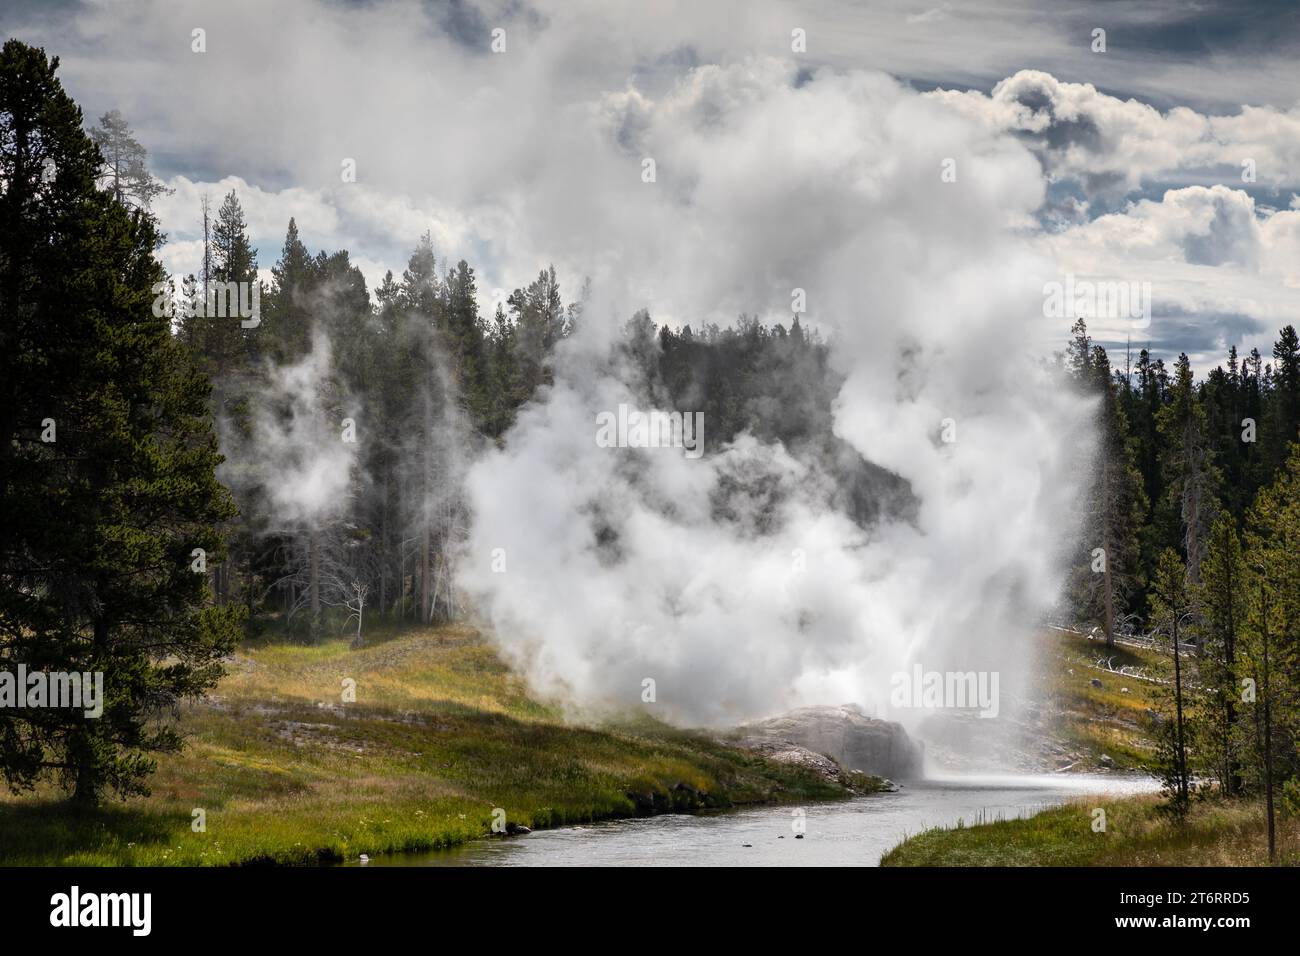 WY05792-00...WYOMING - Eruption of Riverside Geyser on the edge of the Firehole River in the Upper Geyser Basin of Yellowstone National Park. Stock Photo